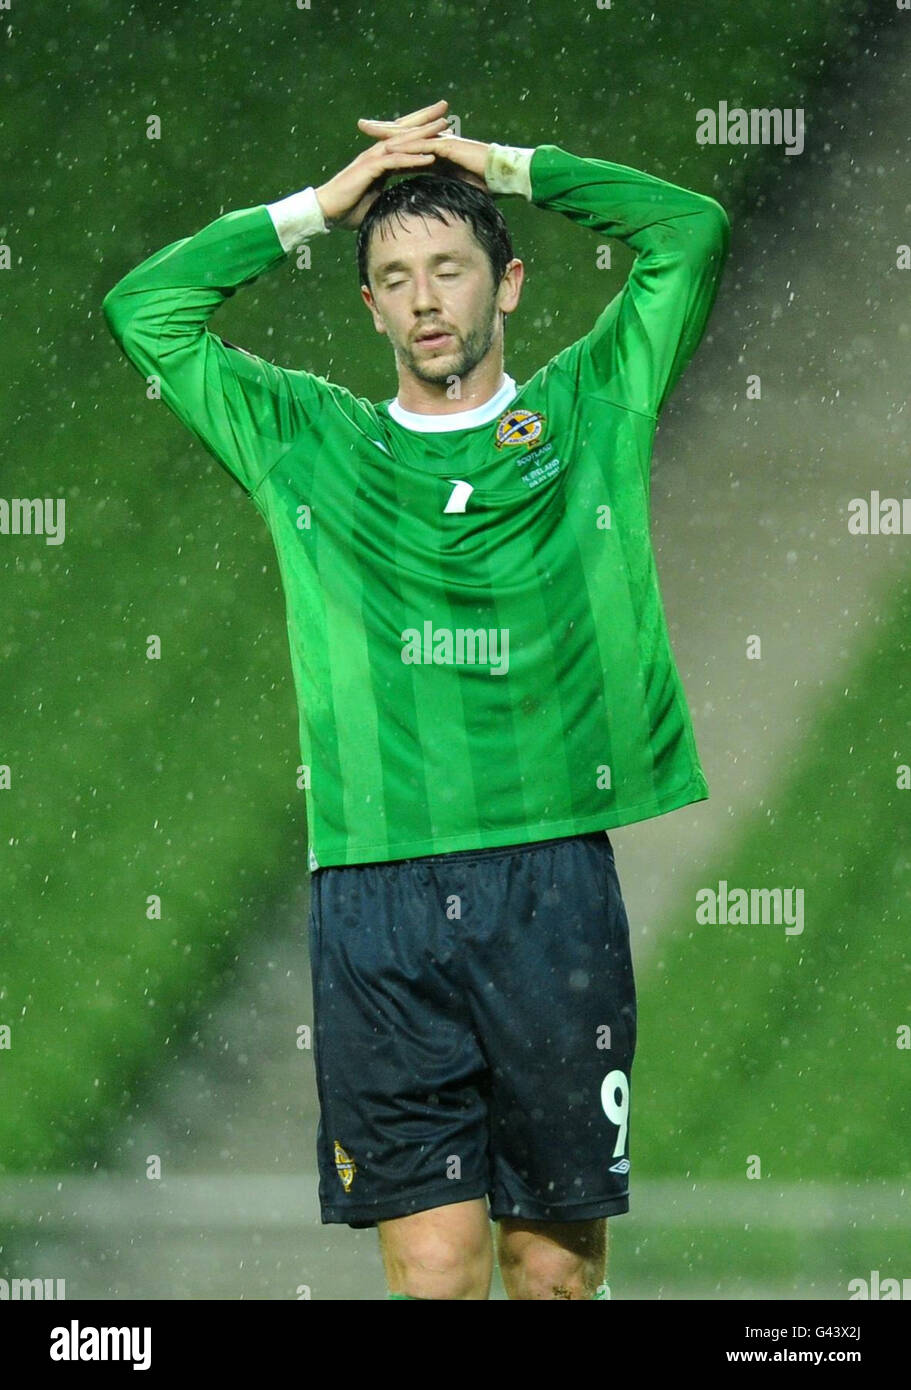 Northern Ireland's Rory Patterson looks dejected as he rues a missed chance during the Carling Nations Cup match at the Aviva Stadium, Dublin, Ireland. Stock Photo